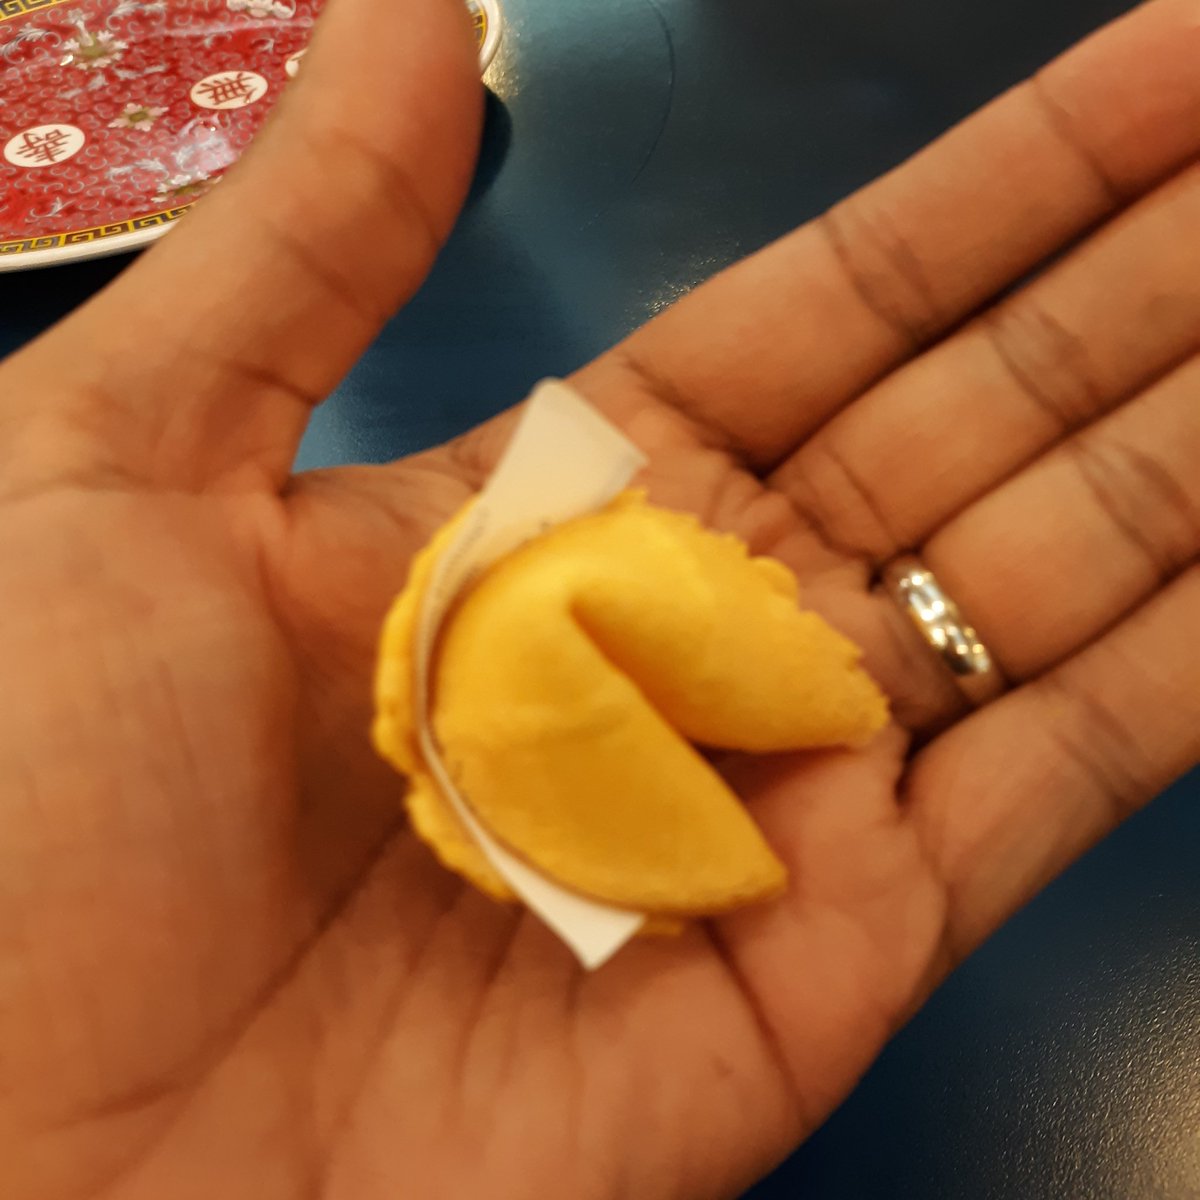 Ever notice how a fortune cookie looks like the Millennium Falcon? Can you see it too? #canyouseeit #milleniumfalcon #fortunecookie #starwars #lunarnewyear